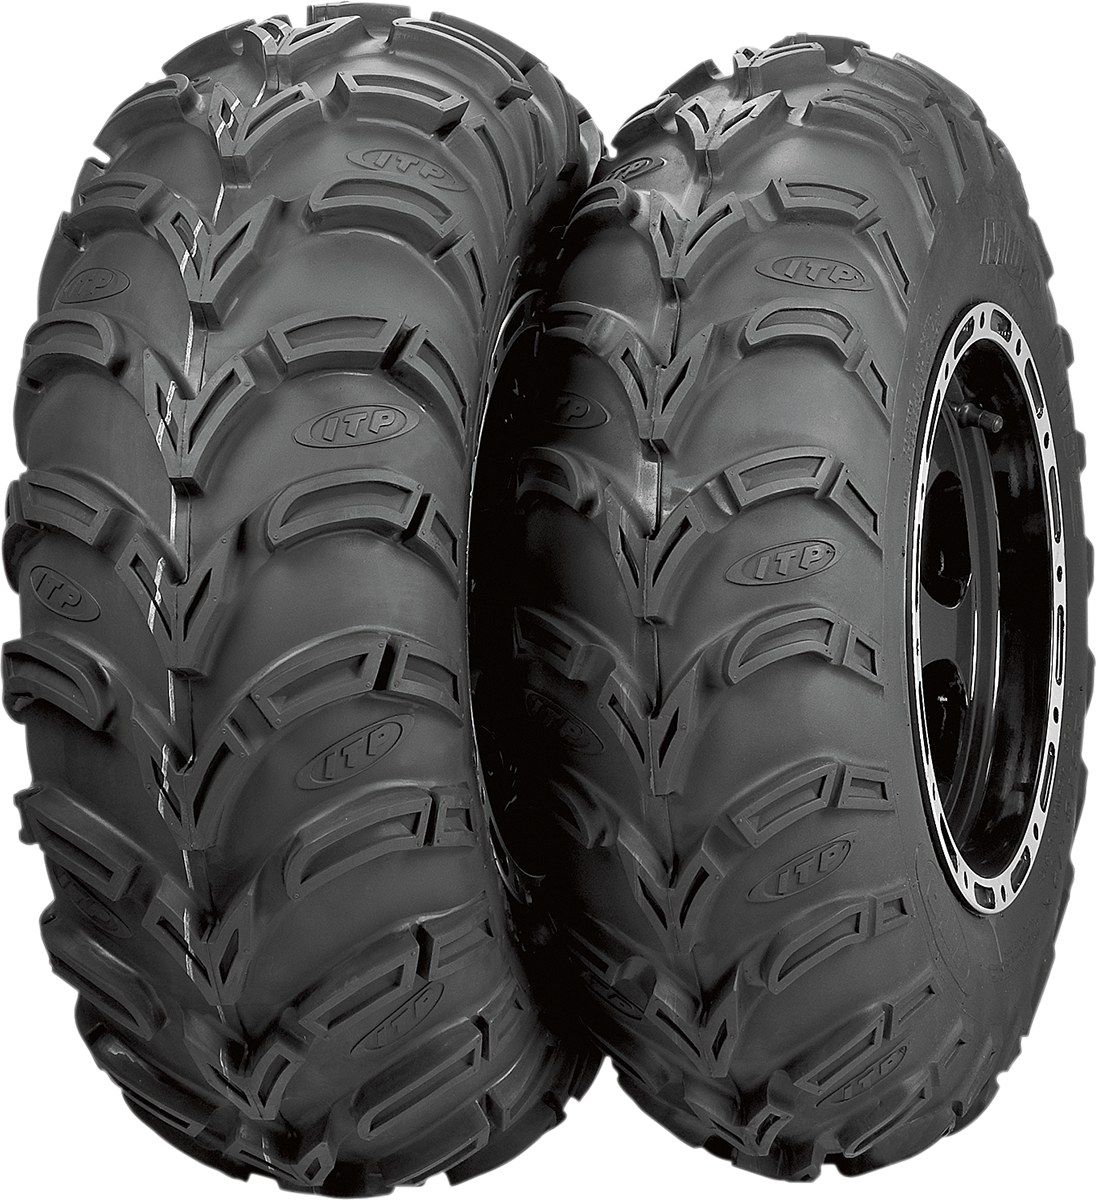 ITP Tire - Mud Lite AT - Front/Rear - 23x8-11 - 6 Ply 56A304